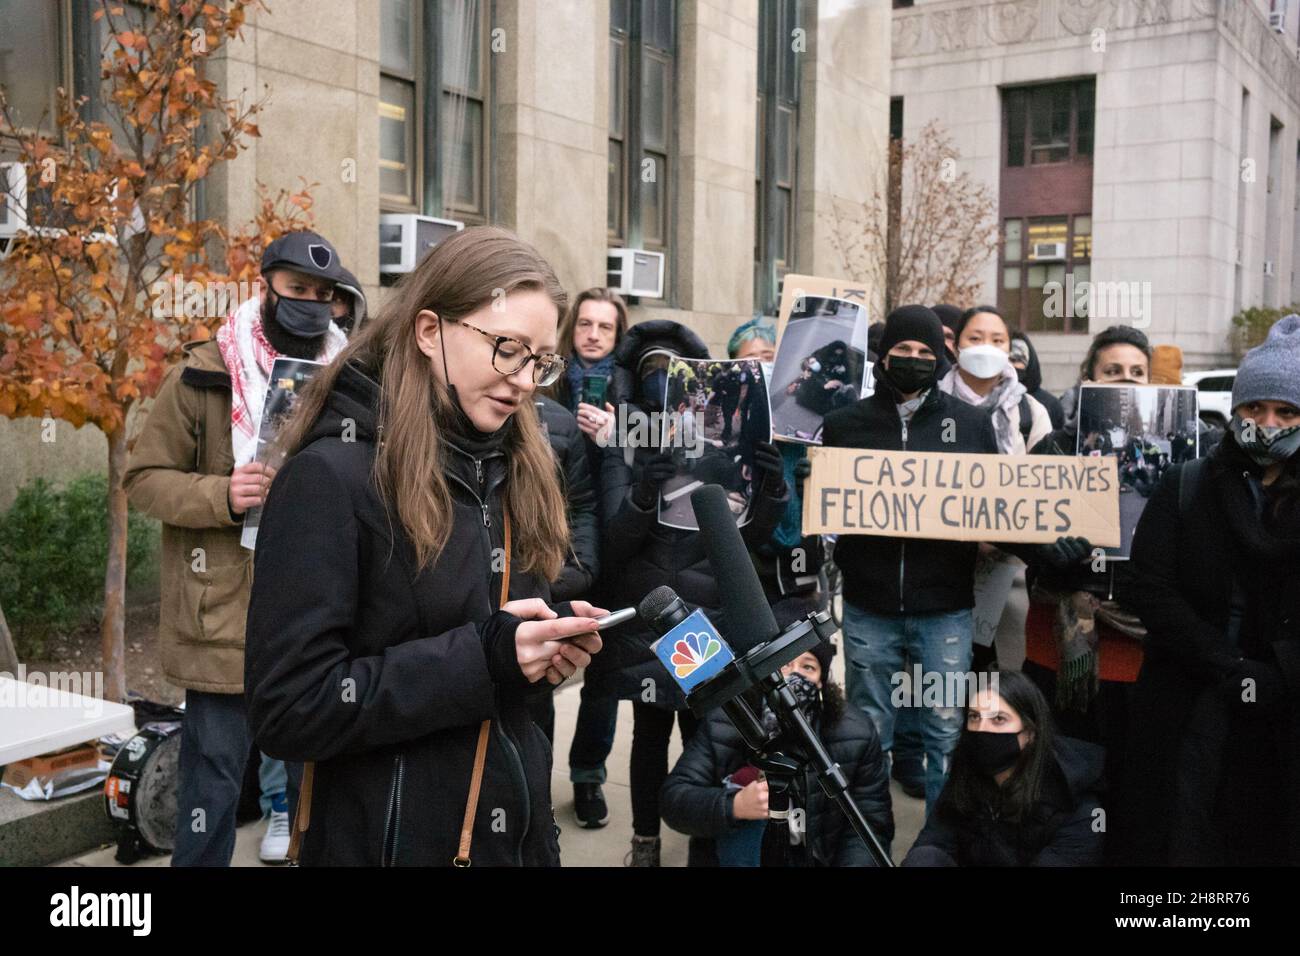 New York, New York, USA. 30th Nov, 2021. TABITHA HOWELL speaks during a news conference in front of the courthouse at 100 Center Street in New York. Rodriguez was one of several people run down during an anti-ICE protest march by queens resident Kathleen Casillo a year ago. Kathleen Casillo's car attack left me with five bulging discs in my back and dramatic brain injury. It's one thing to face a long physical recovery. it's another to try to process what happened mentally and emotionally.'' Howell went on to say 'I don't pretend know what perfect accountability looks like. But I Stock Photo